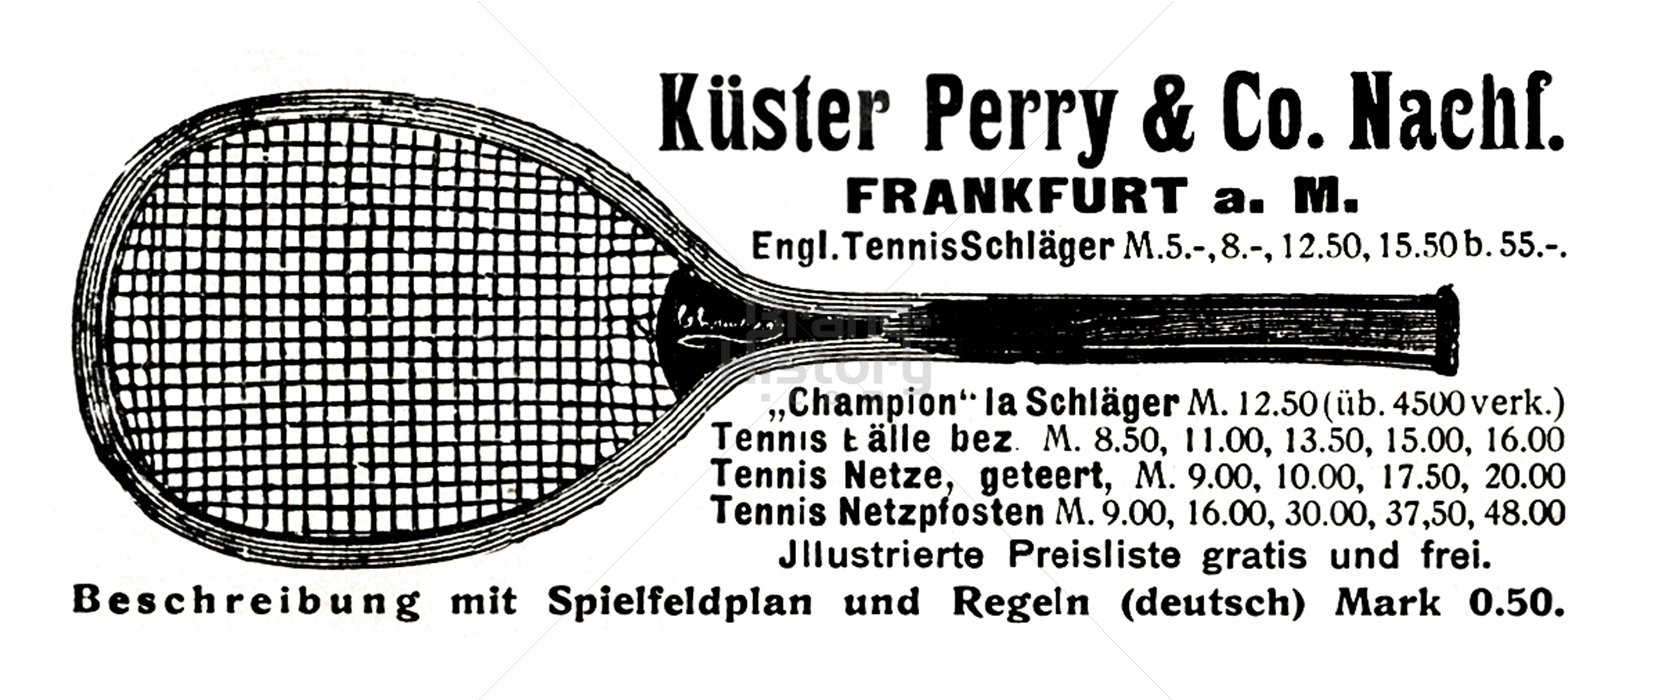 Küster Perry & Co.